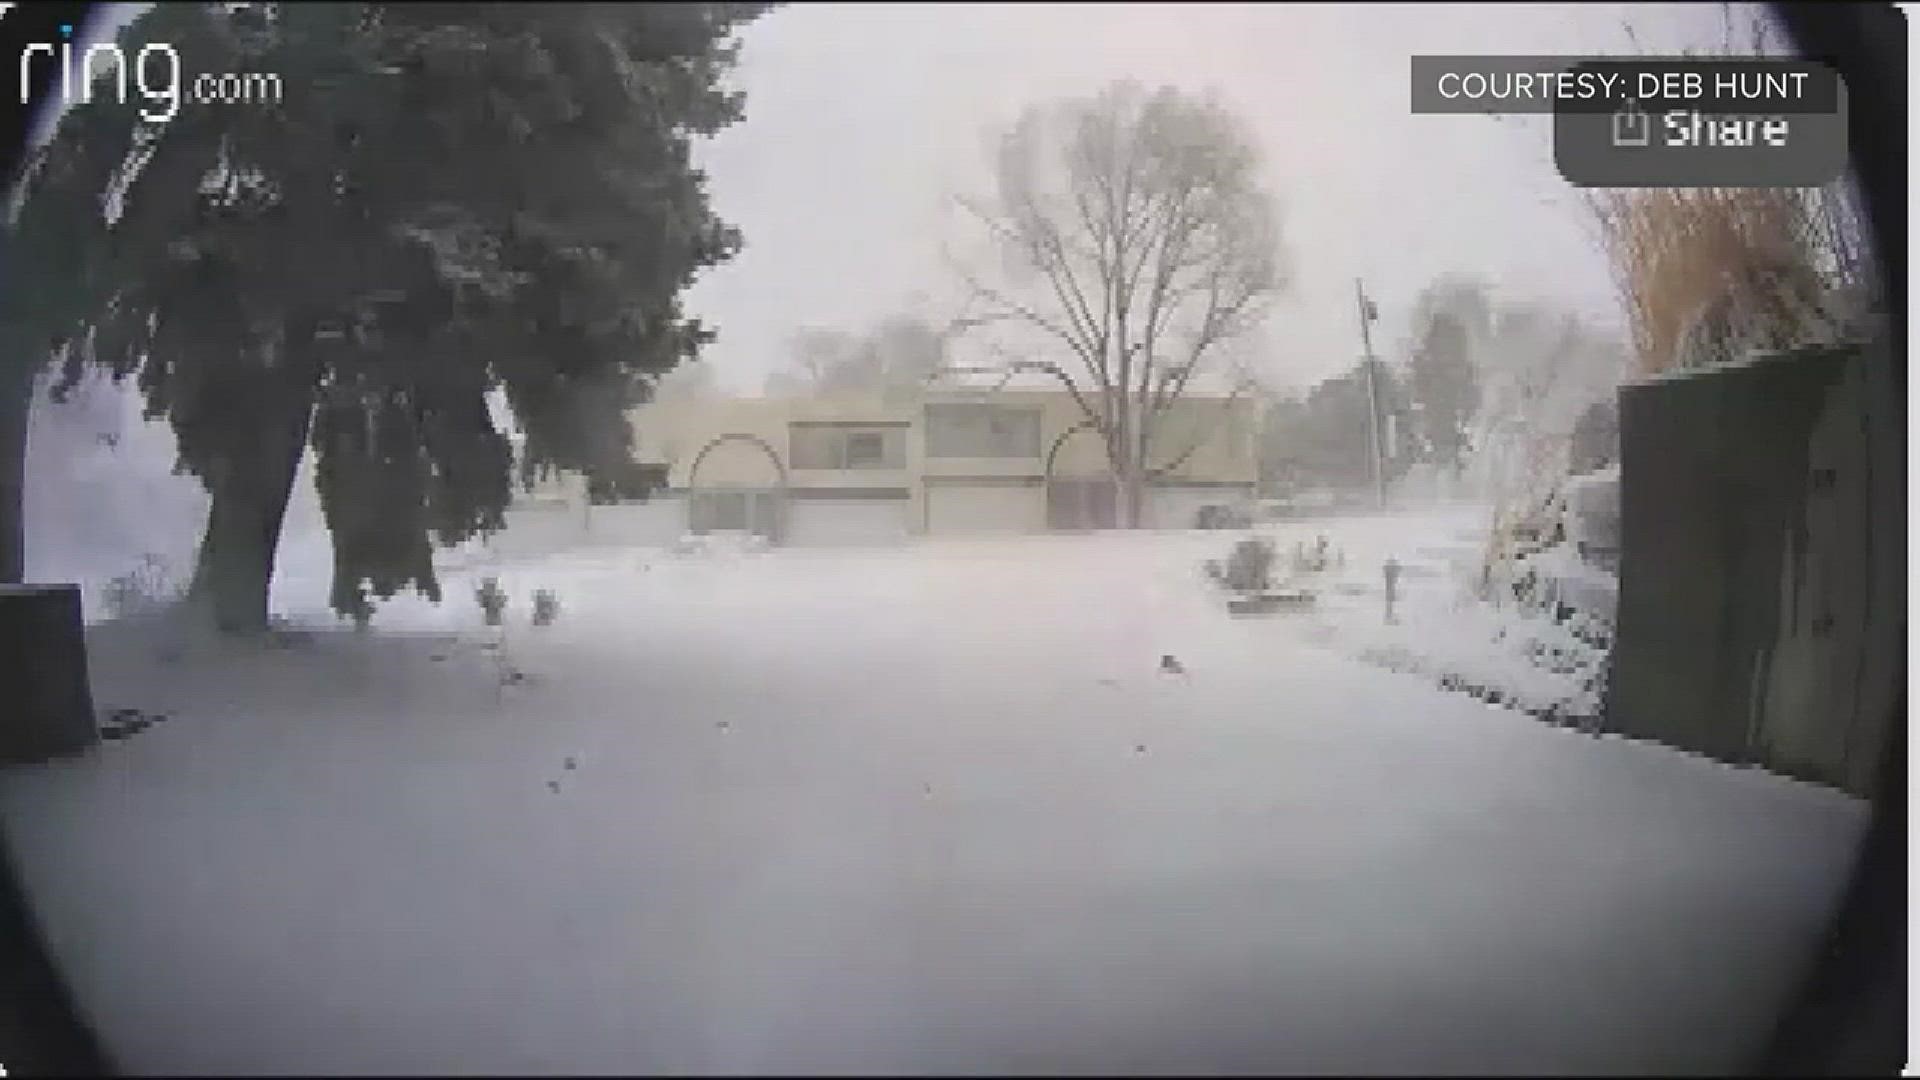 9NEWS viewers from around Colorado shared their videos with us - capturing hazardous road conditions, downed trees, intense winds and other effects of Wednesday's blizzard that swept across the state.